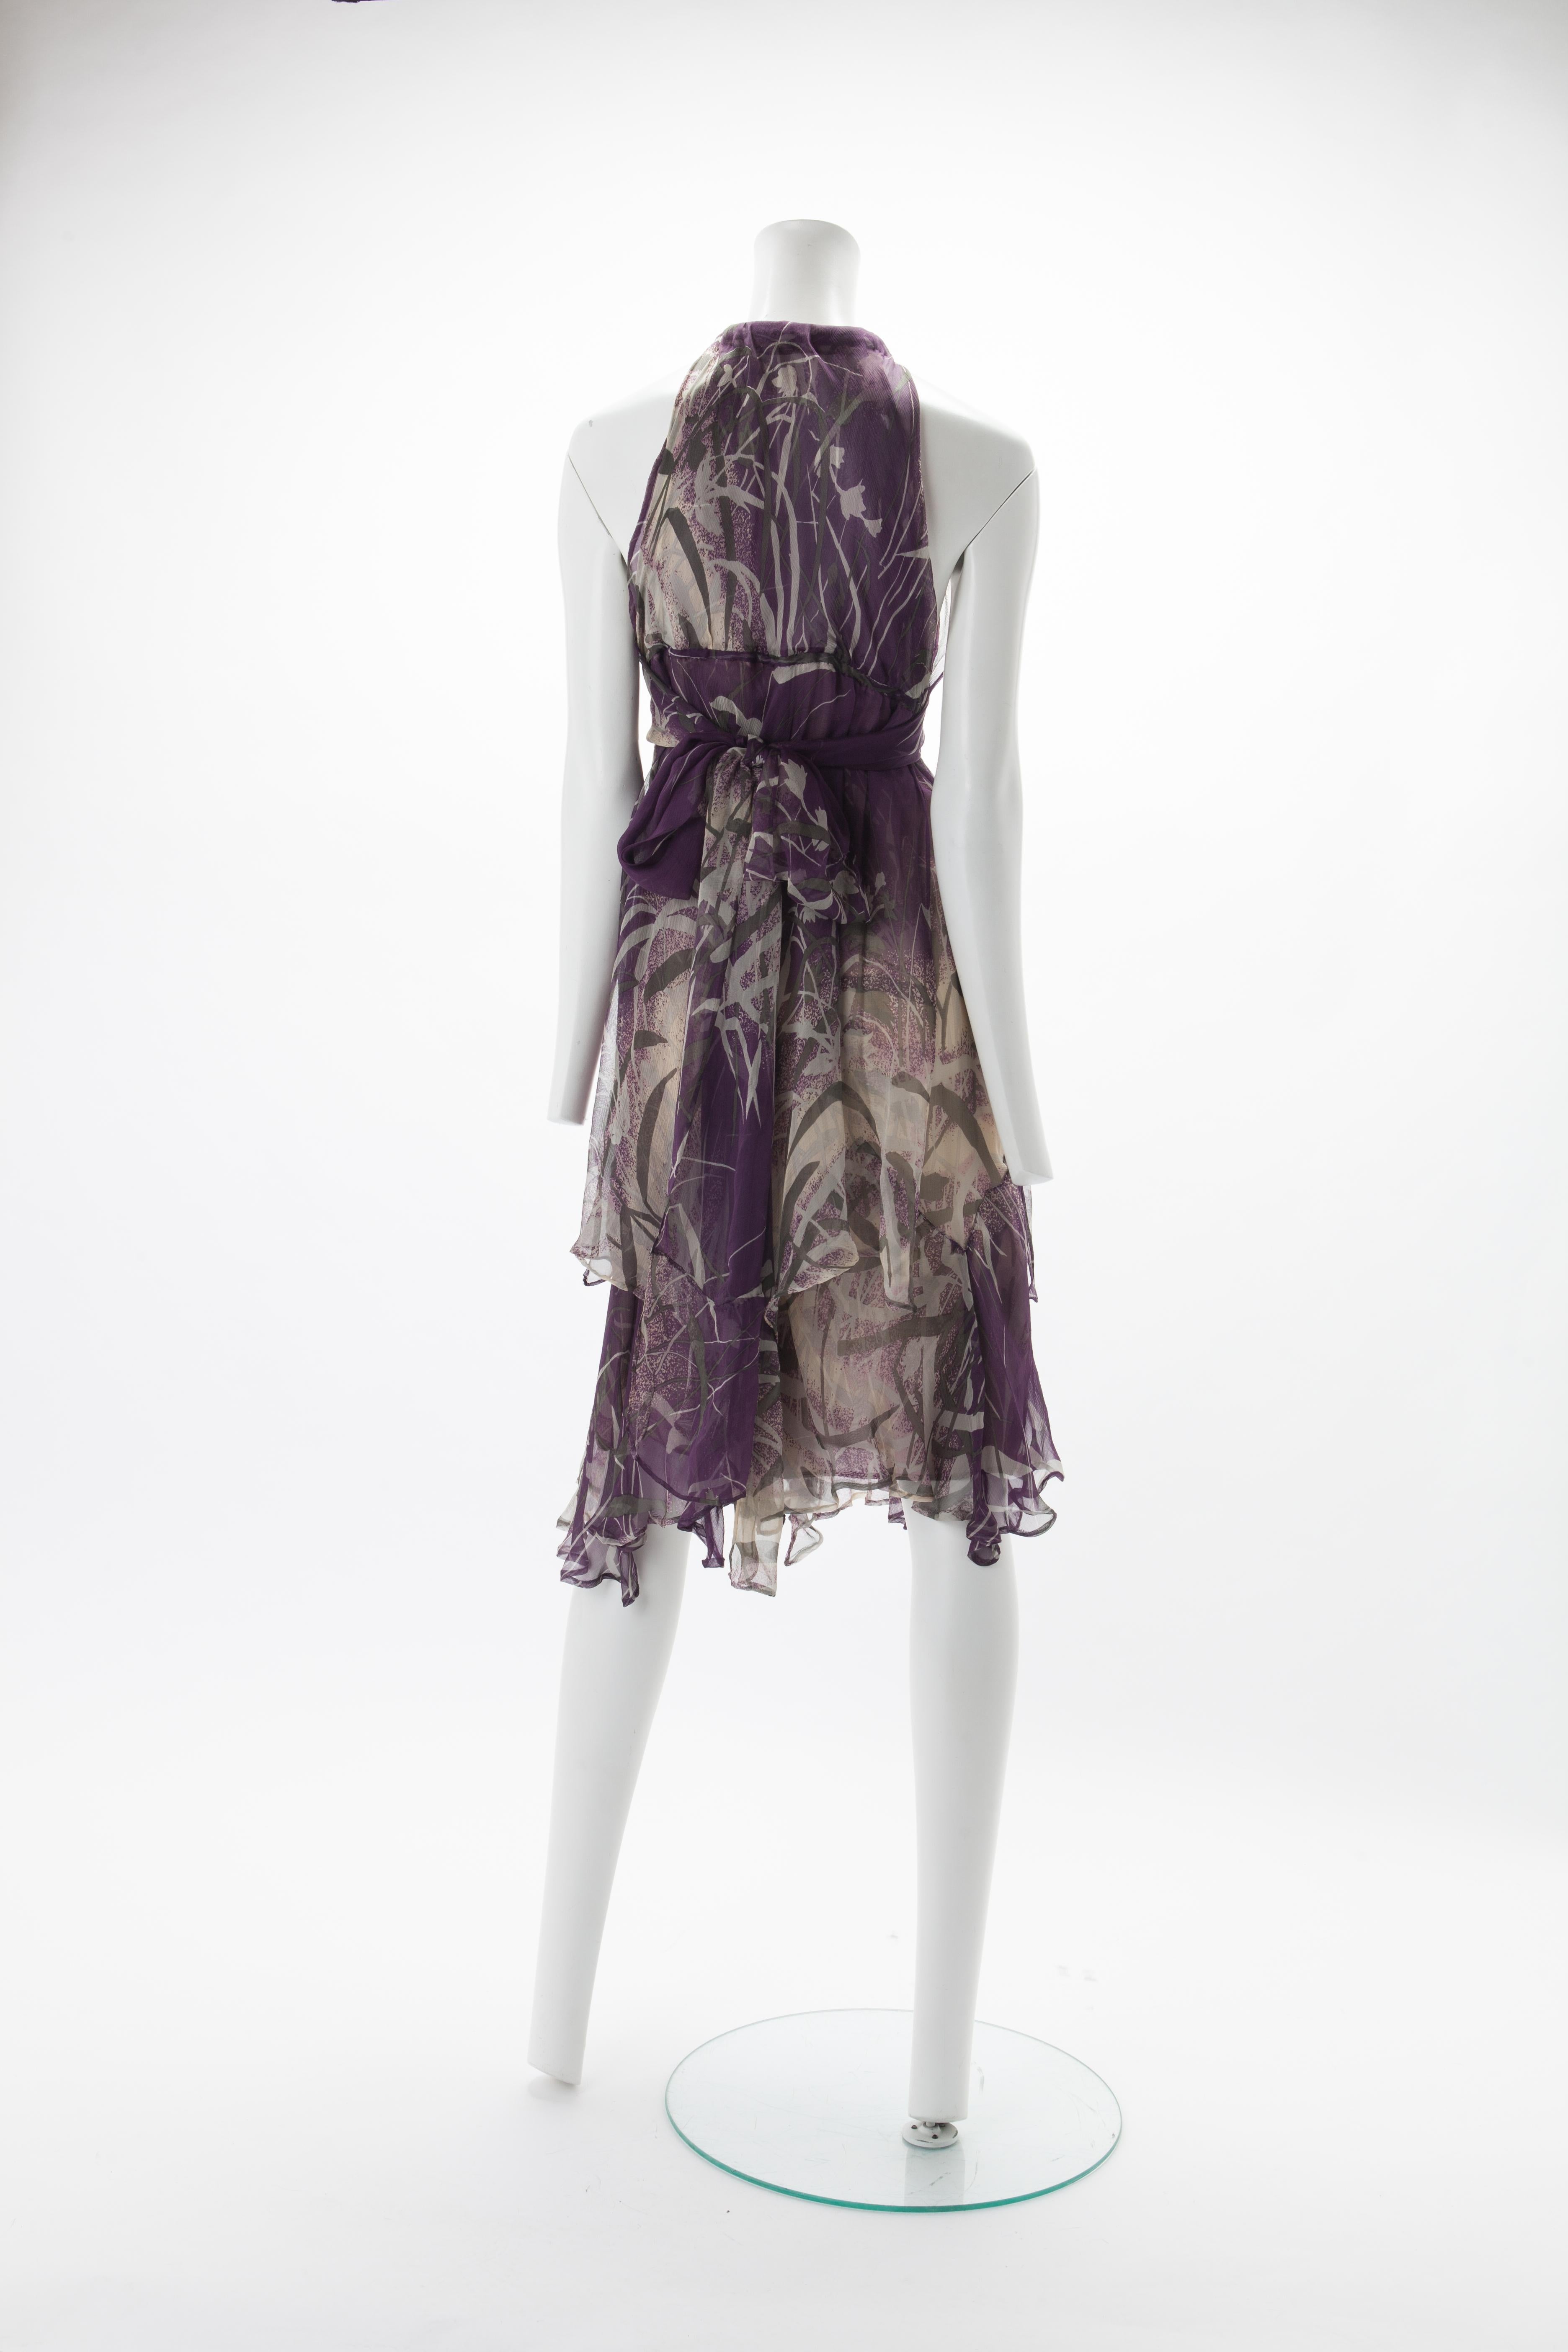 Gray Yves Saint Laurent Couture Foliage Printed Silk Chiffon Cocktail Dress, c.1970s.